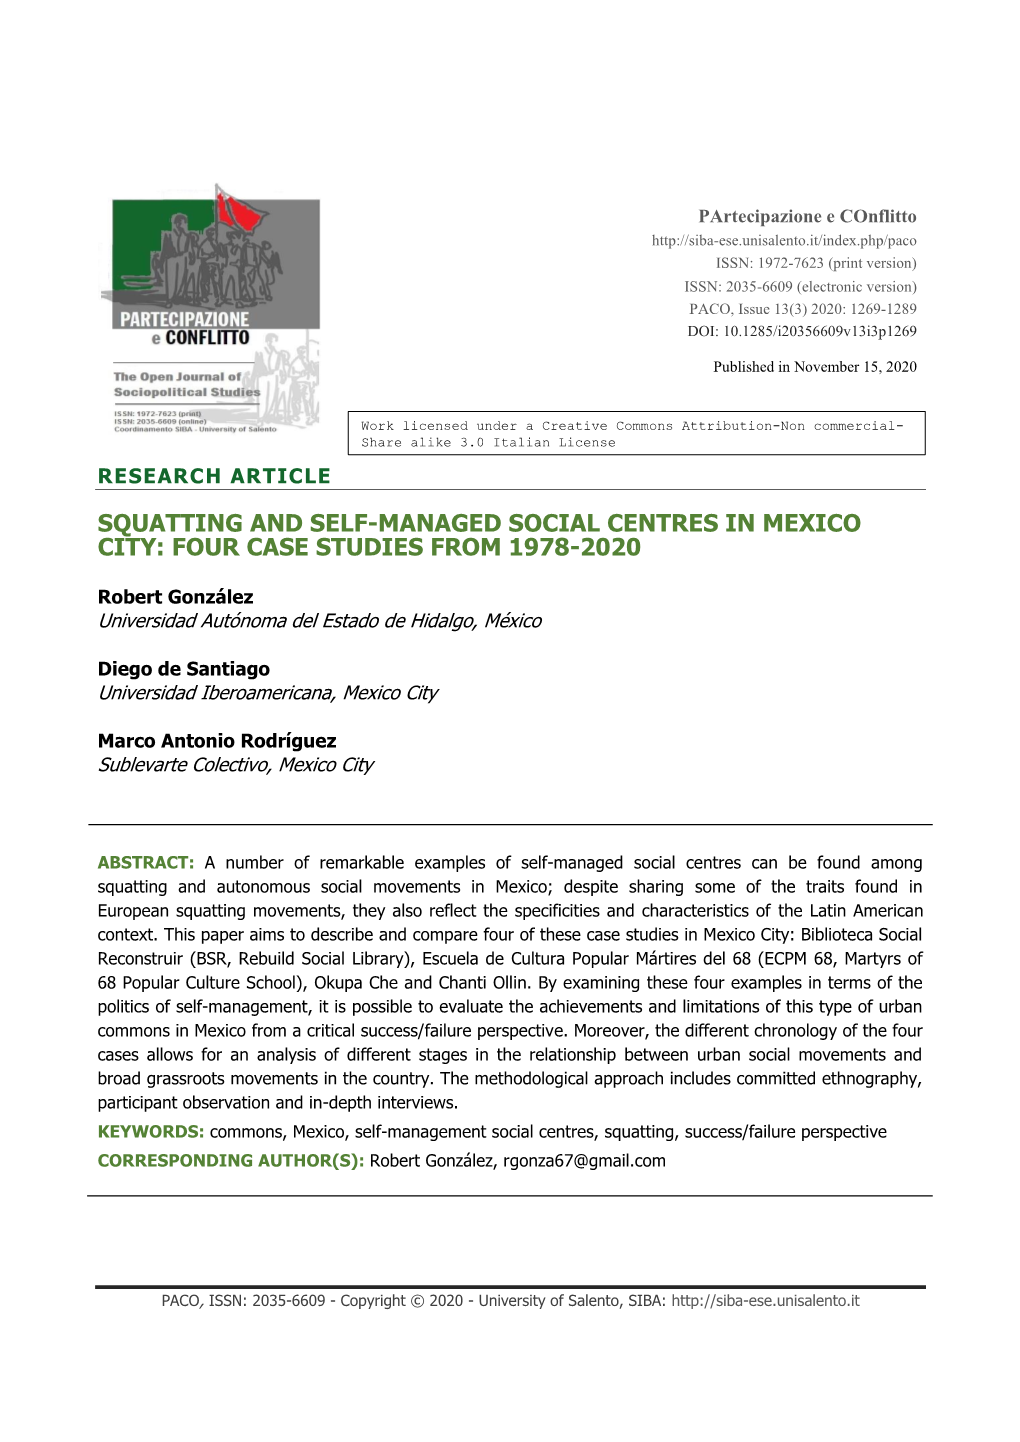 Squatting and Self-Managed Social Centres in Mexico City: Four Case Studies from 1978-2020